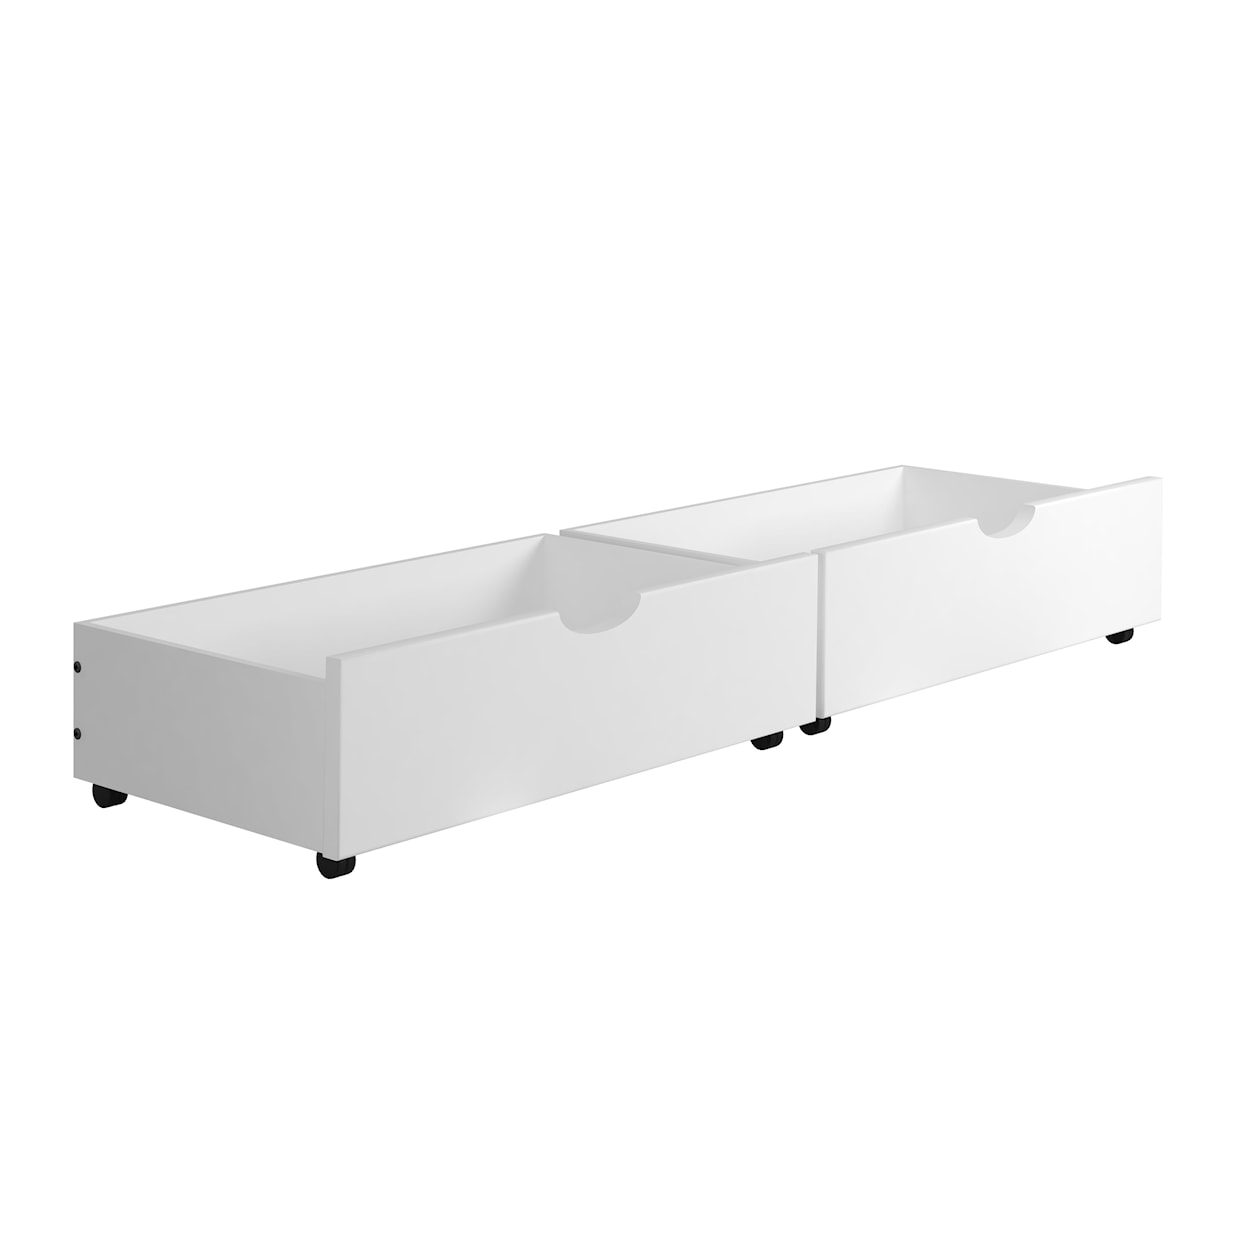 Donco Trading Co Donco Trading Co WHITE SET OF 2 UNDERBED DRAWERS |